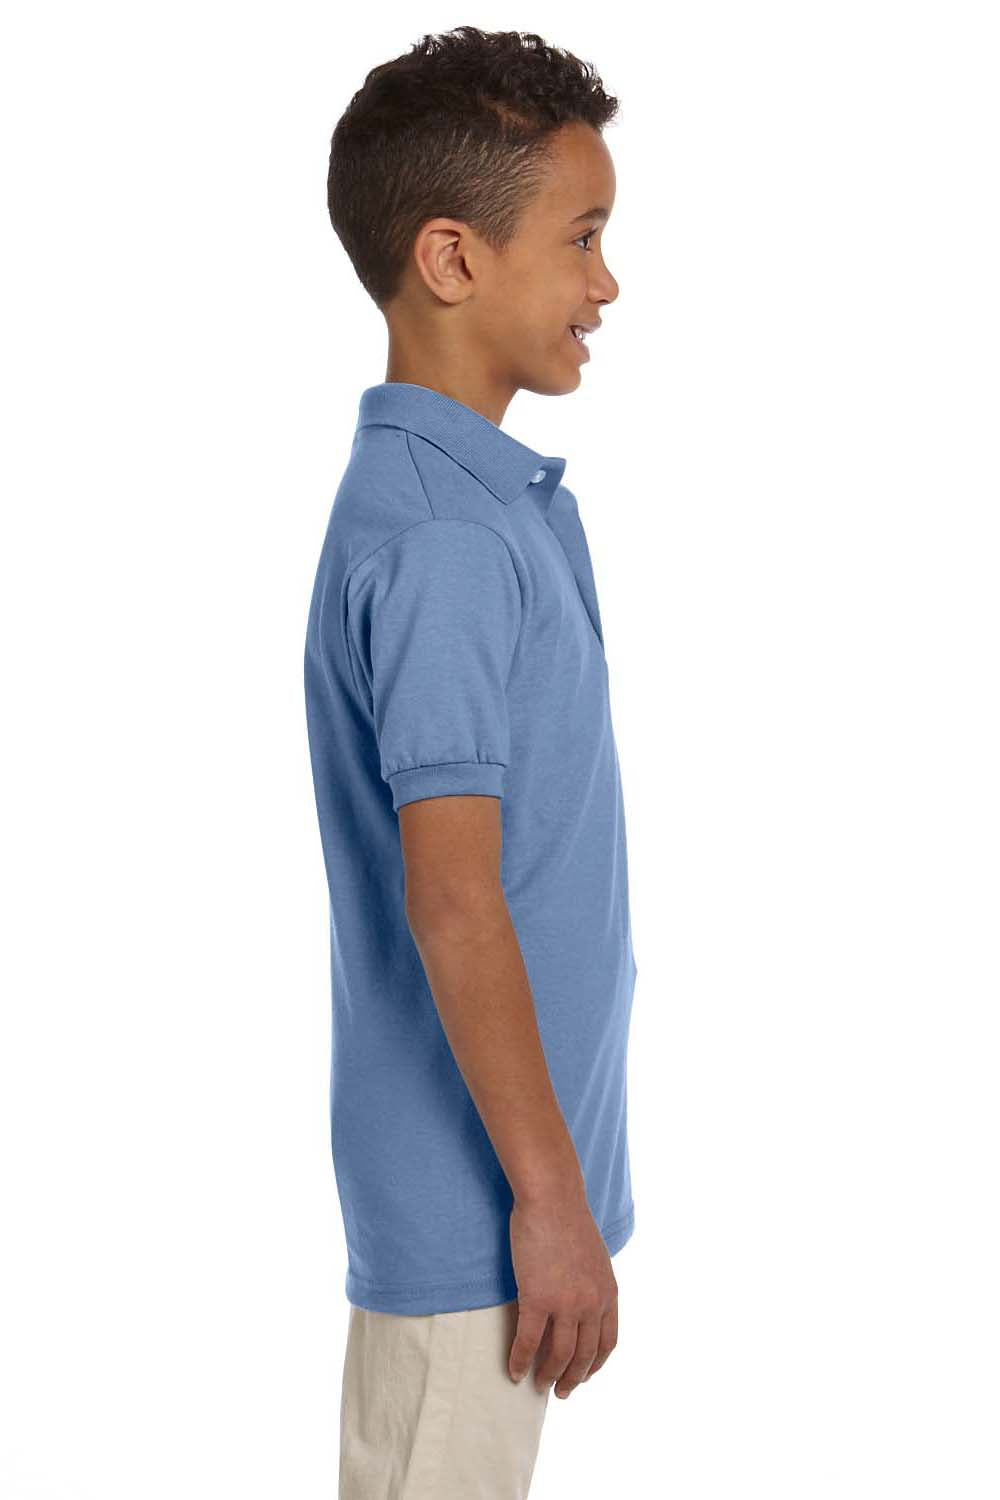 Jerzees 437Y Youth SpotShield Stain Resistant Short Sleeve Polo Shirt Light Blue Side